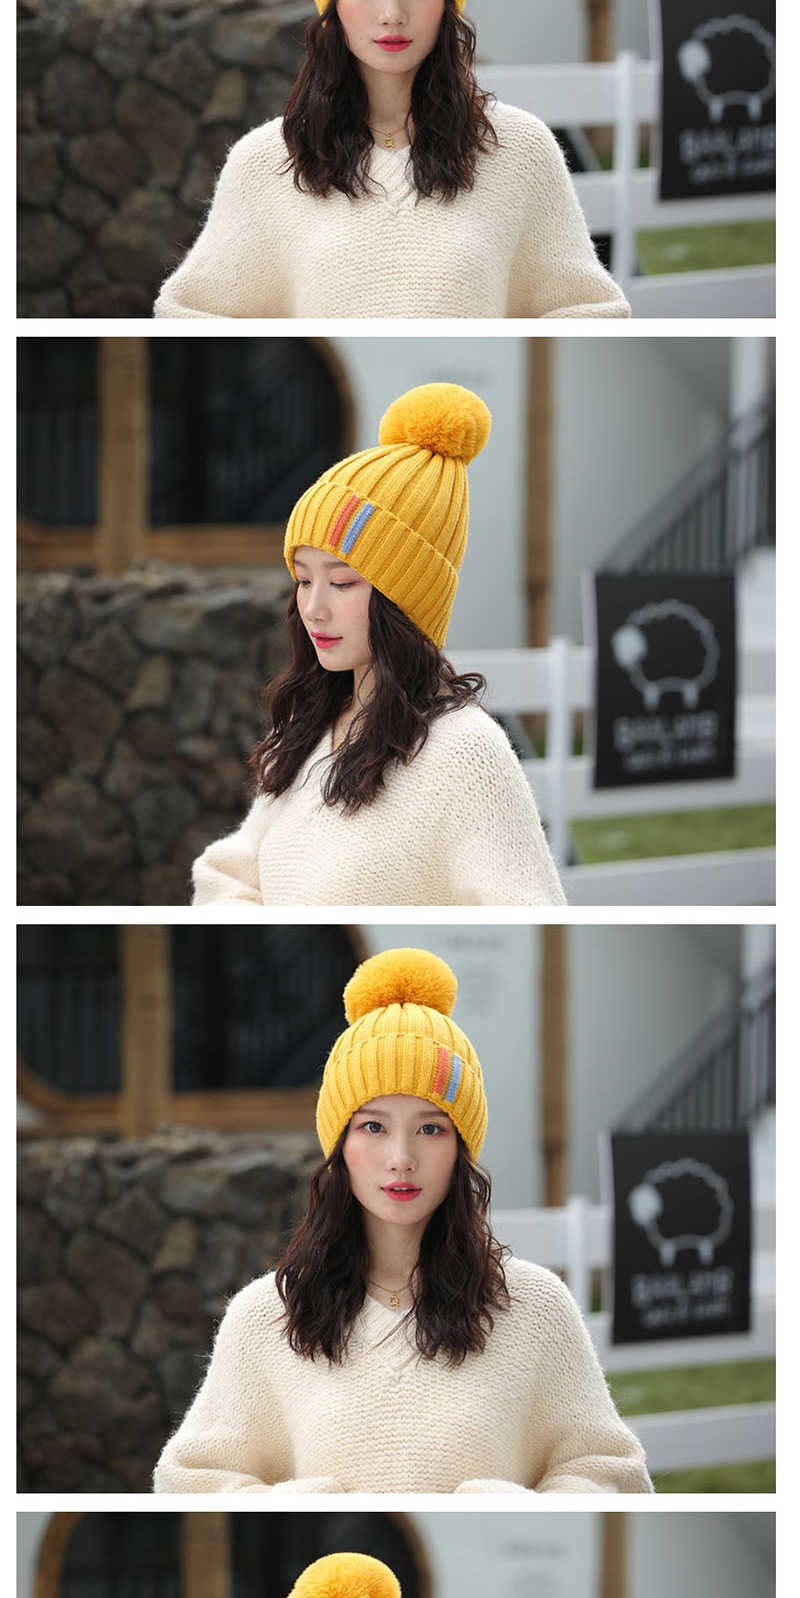 Fashion Red Contrast Striped Knit Wool Hat,Knitting Wool Hats